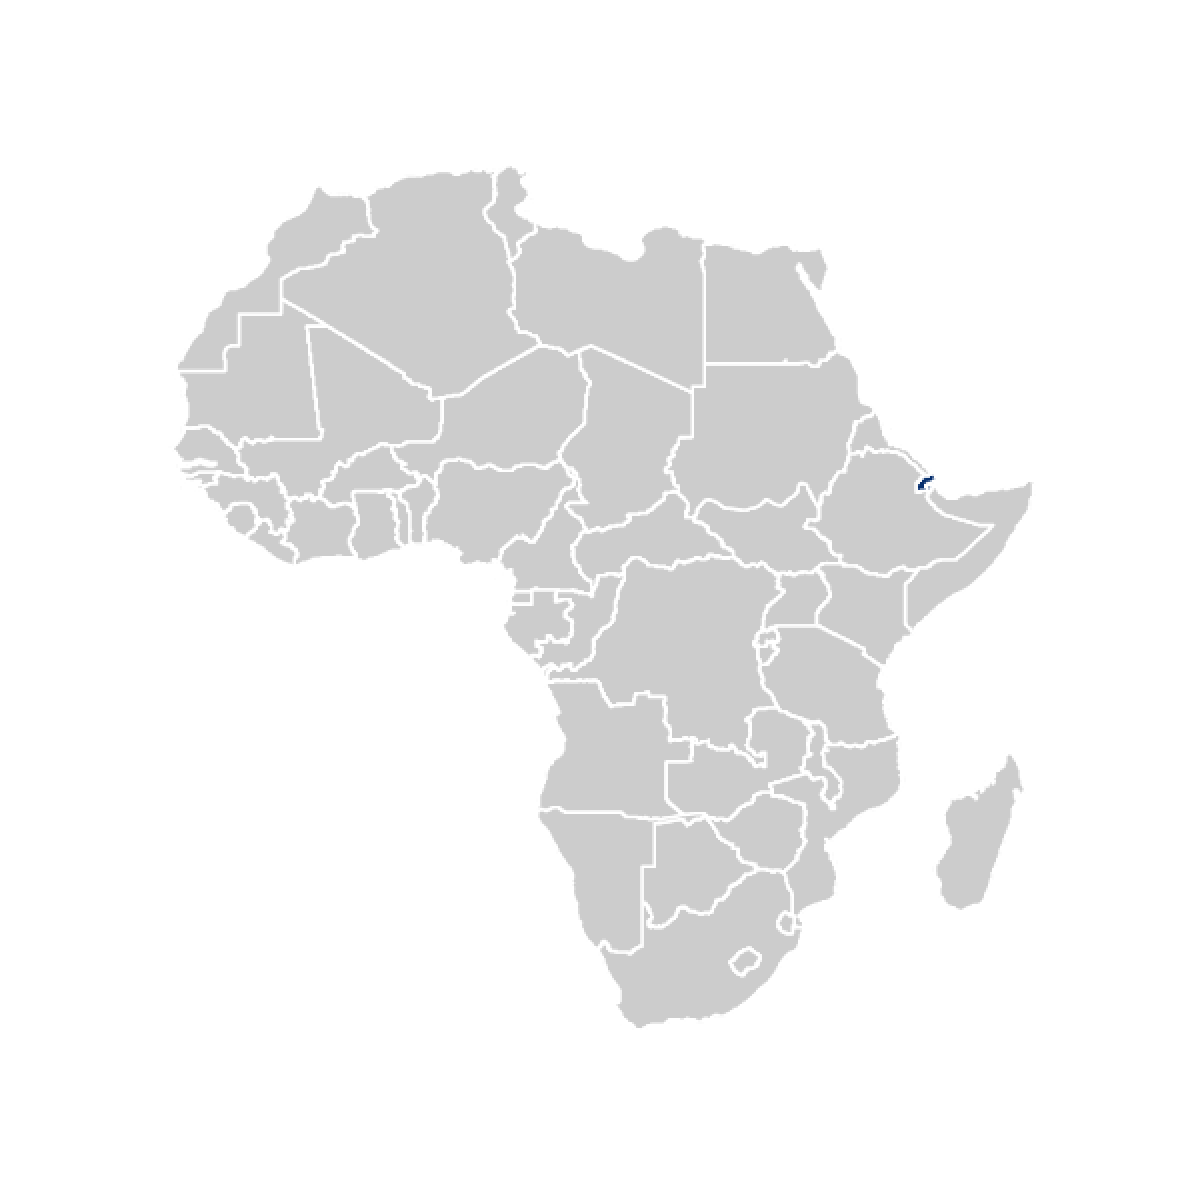 Djibouti highlighted on map of Africa